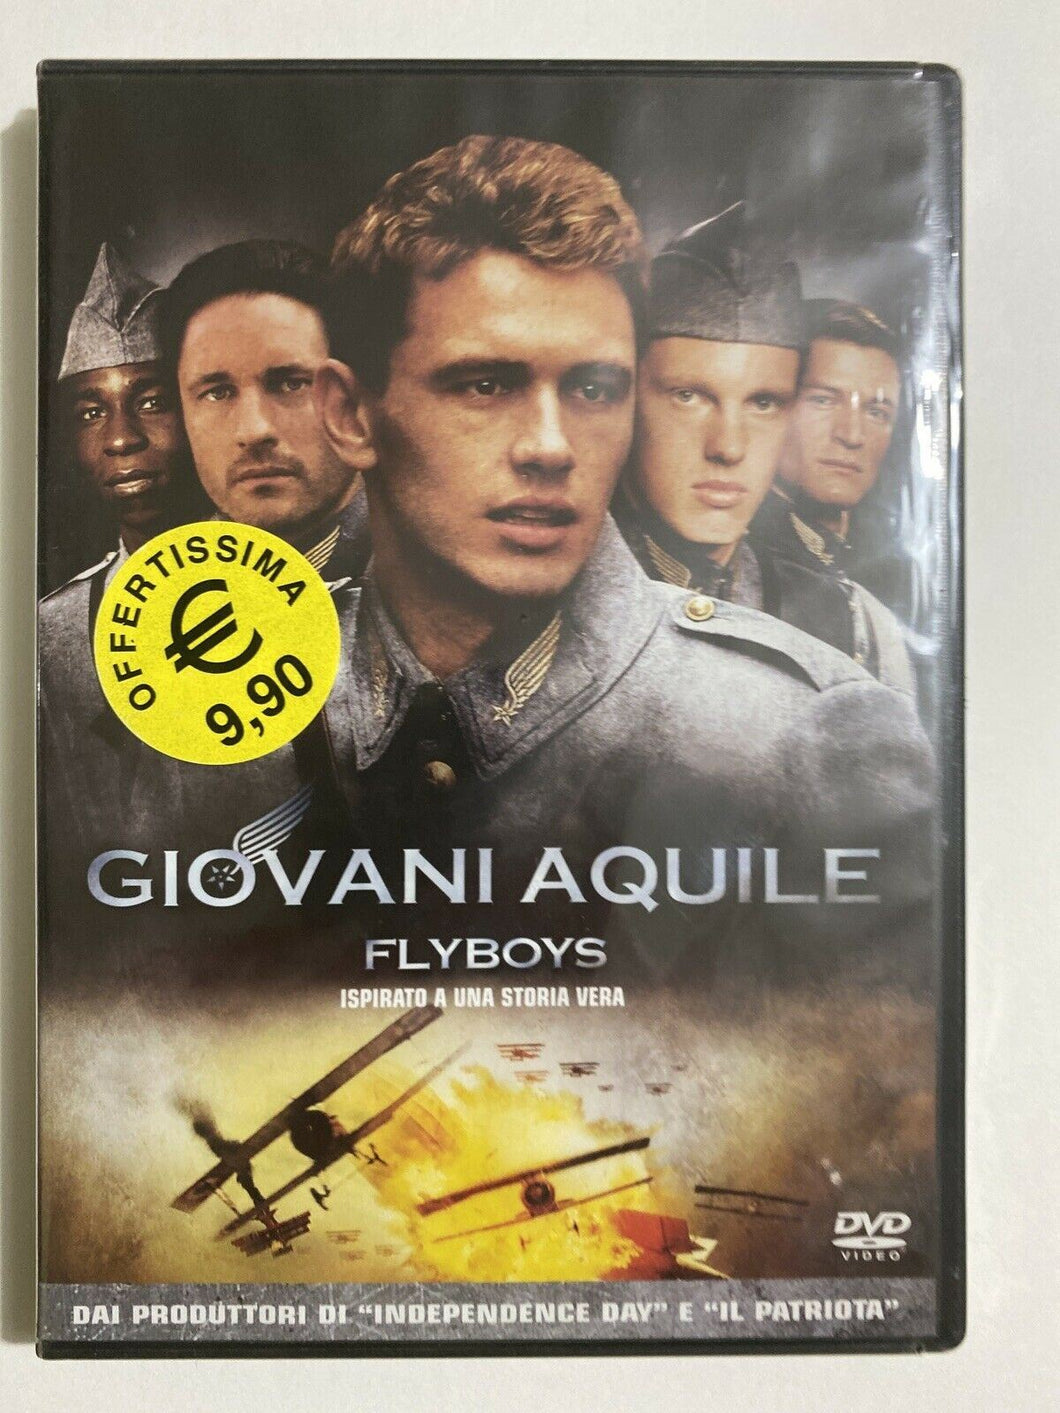 Giovani aquile. Flyboys (2006) DVD Nuovo